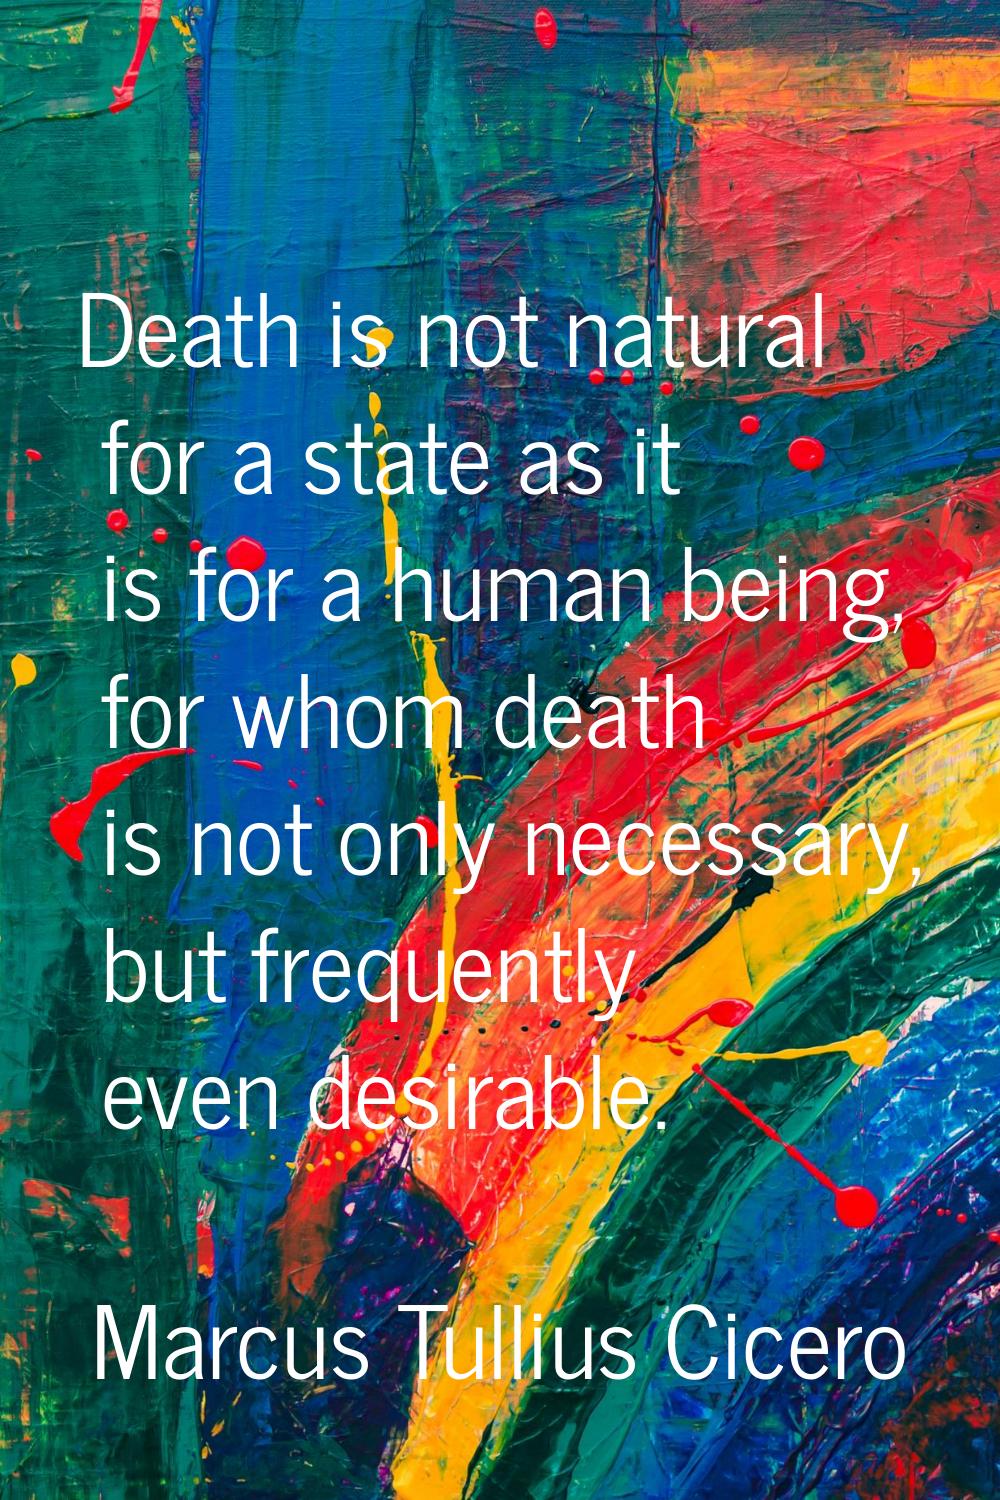 Death is not natural for a state as it is for a human being, for whom death is not only necessary, 